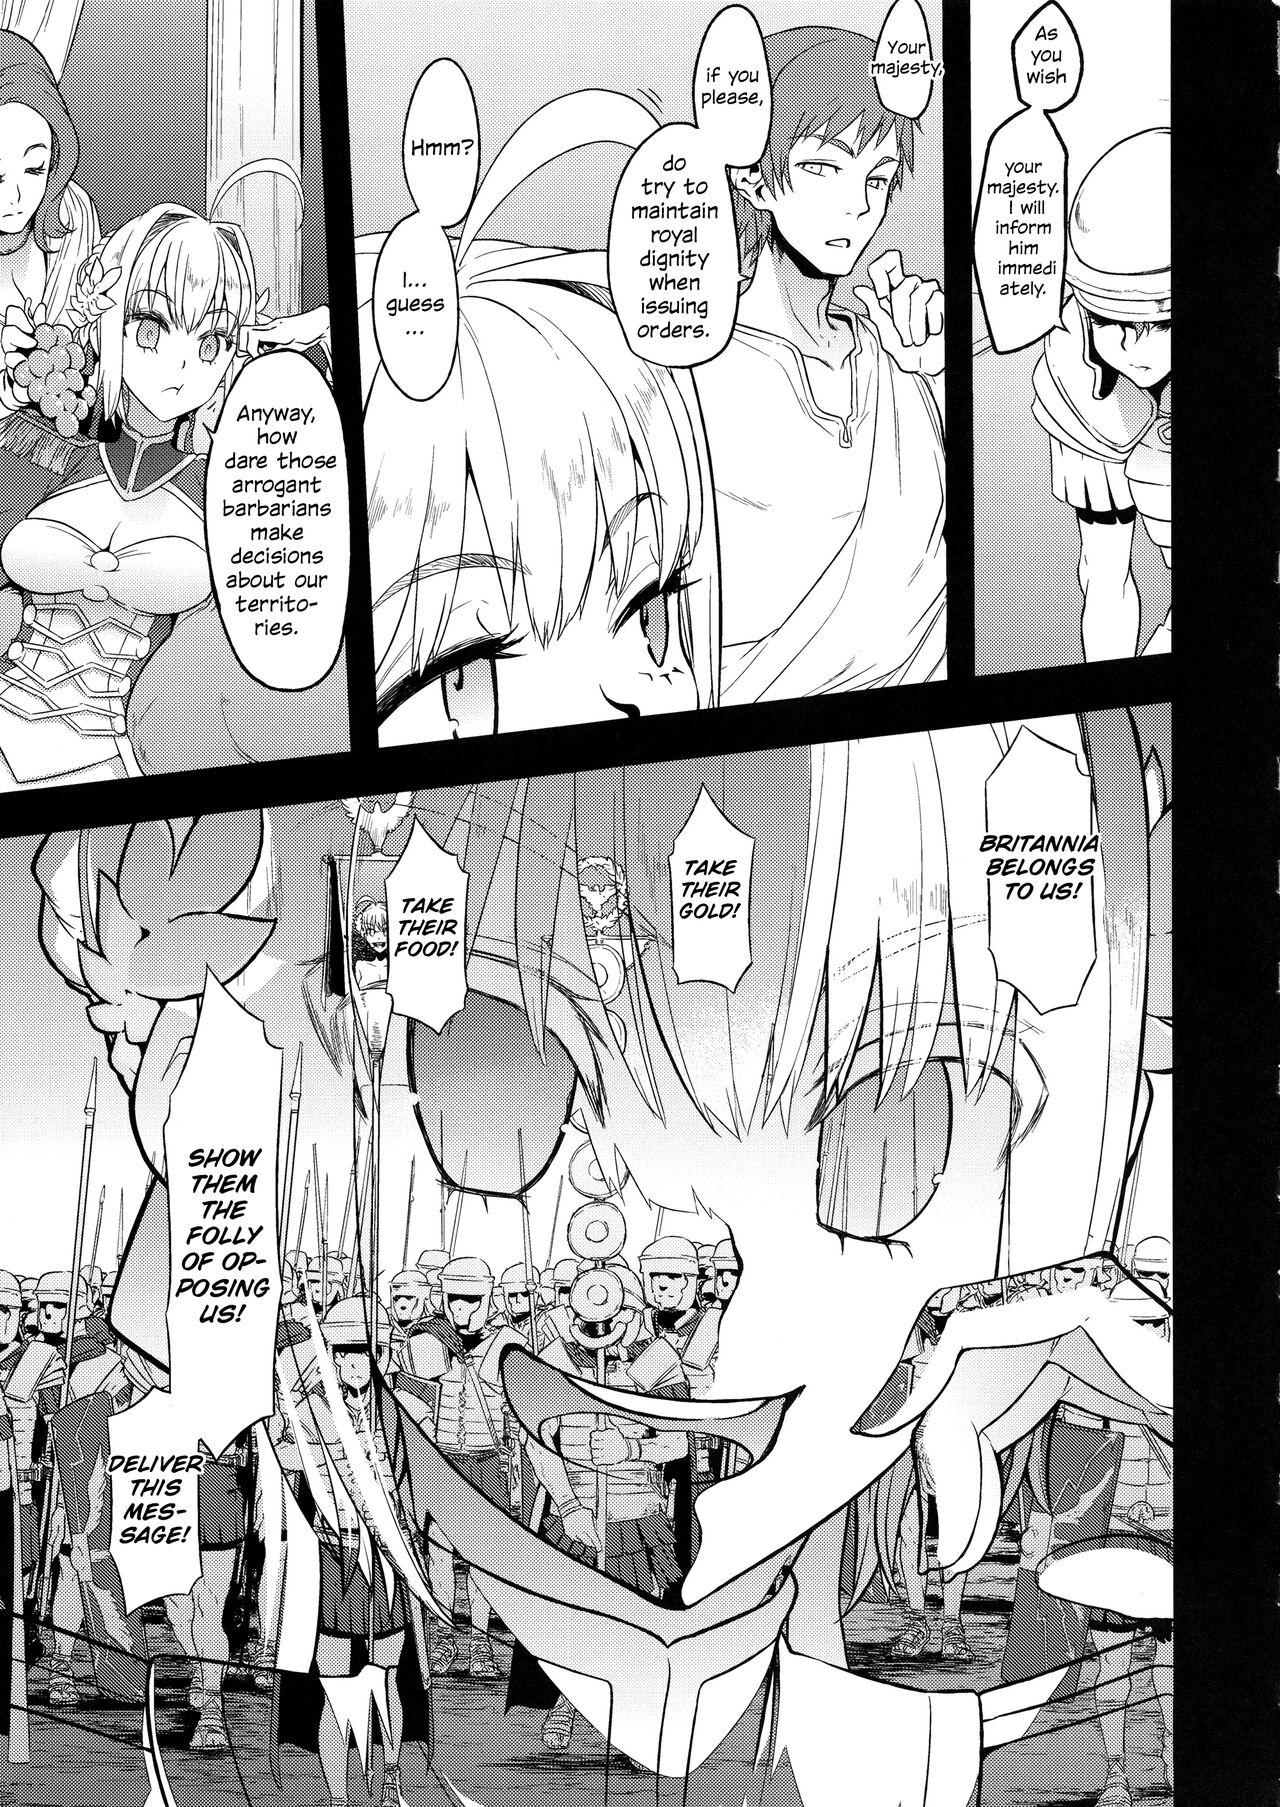 Eating Pussy (COMIC1☆13) [DA HOOTCH (ShindoL)] BOUDICA -Yakusoku Sarezaru Shouri no Joou- | The Queen of Victory Who Never Compromises (Fate/Grand Order) [English]] [EHCOVE] - Fate grand order Free Amateur Porn - Page 4